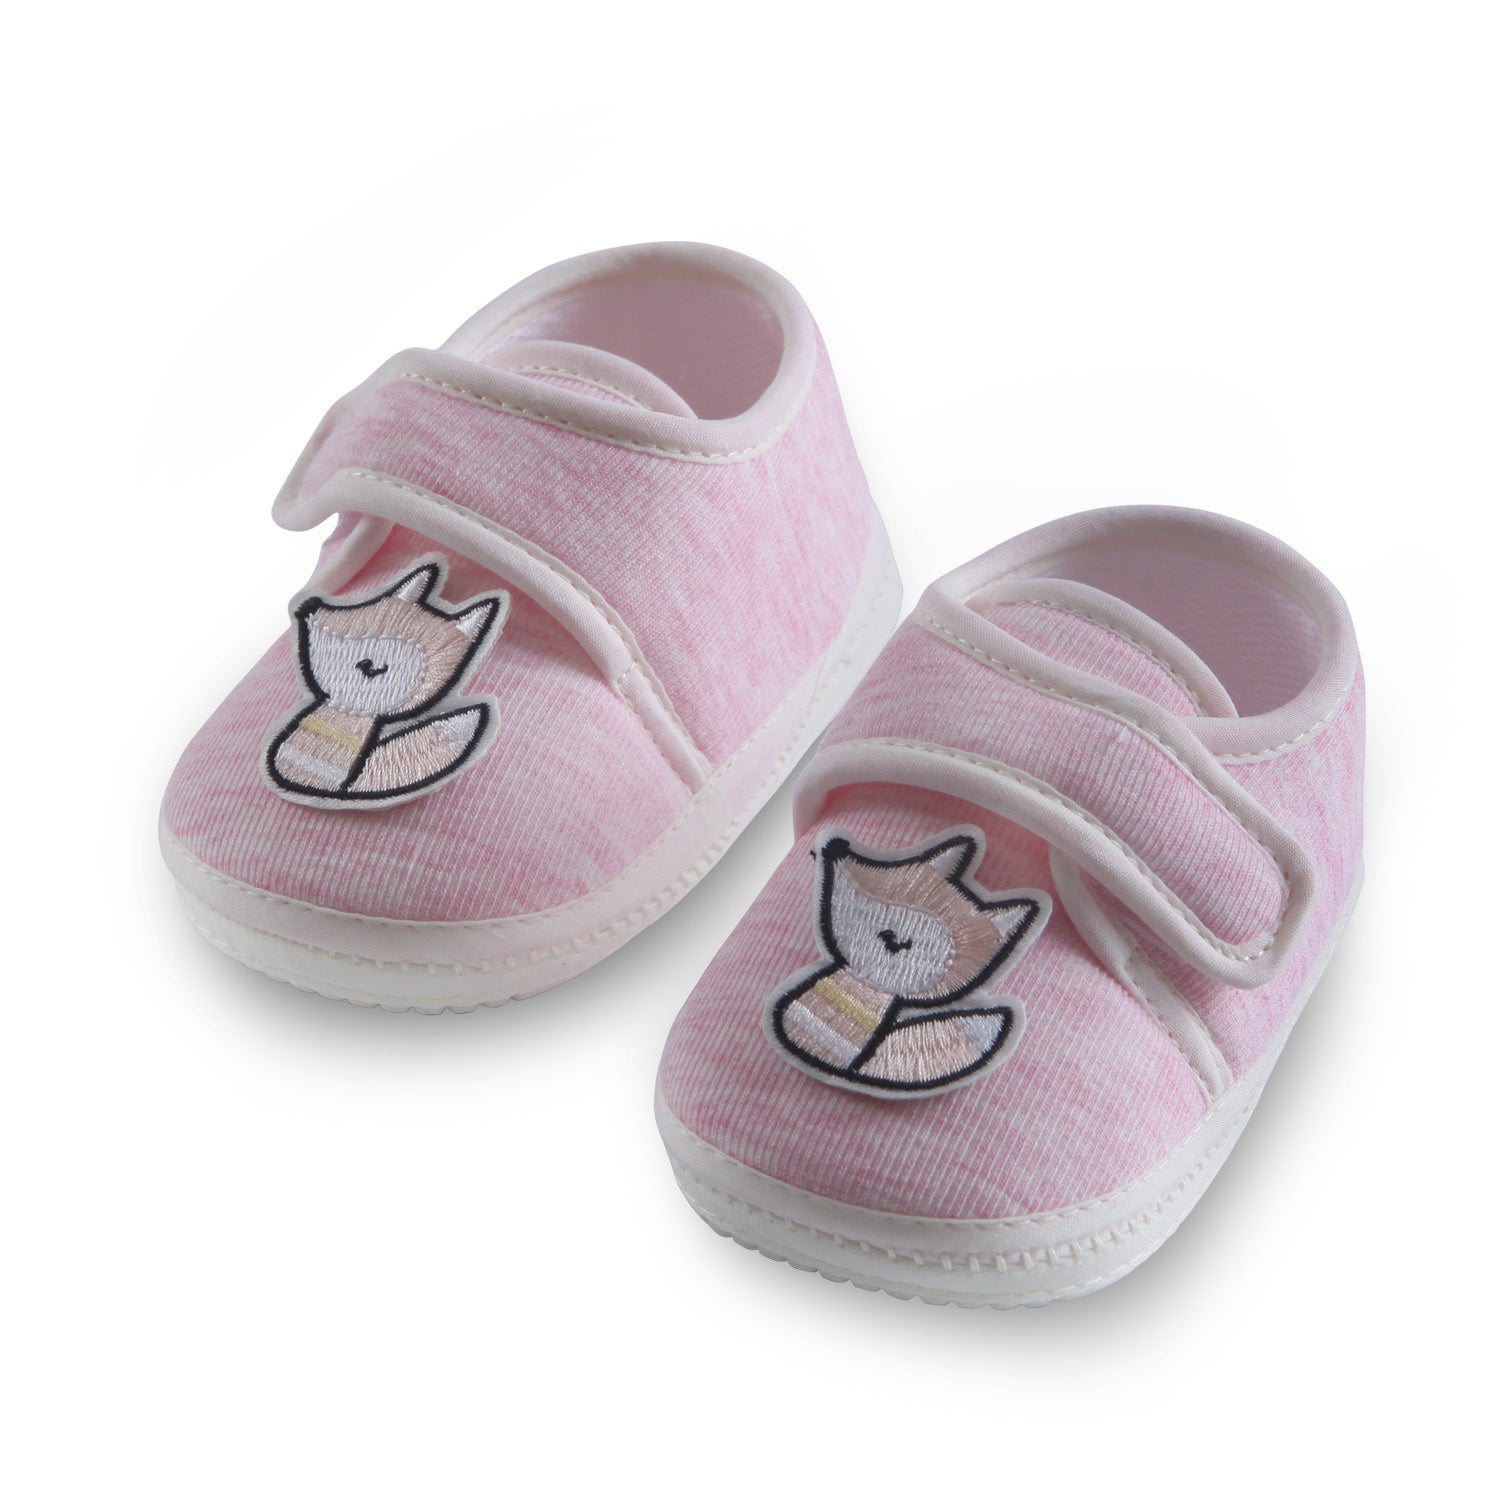 Non-slip Booties with Strap Kids Shoes Fox - Pink - Baby Moo